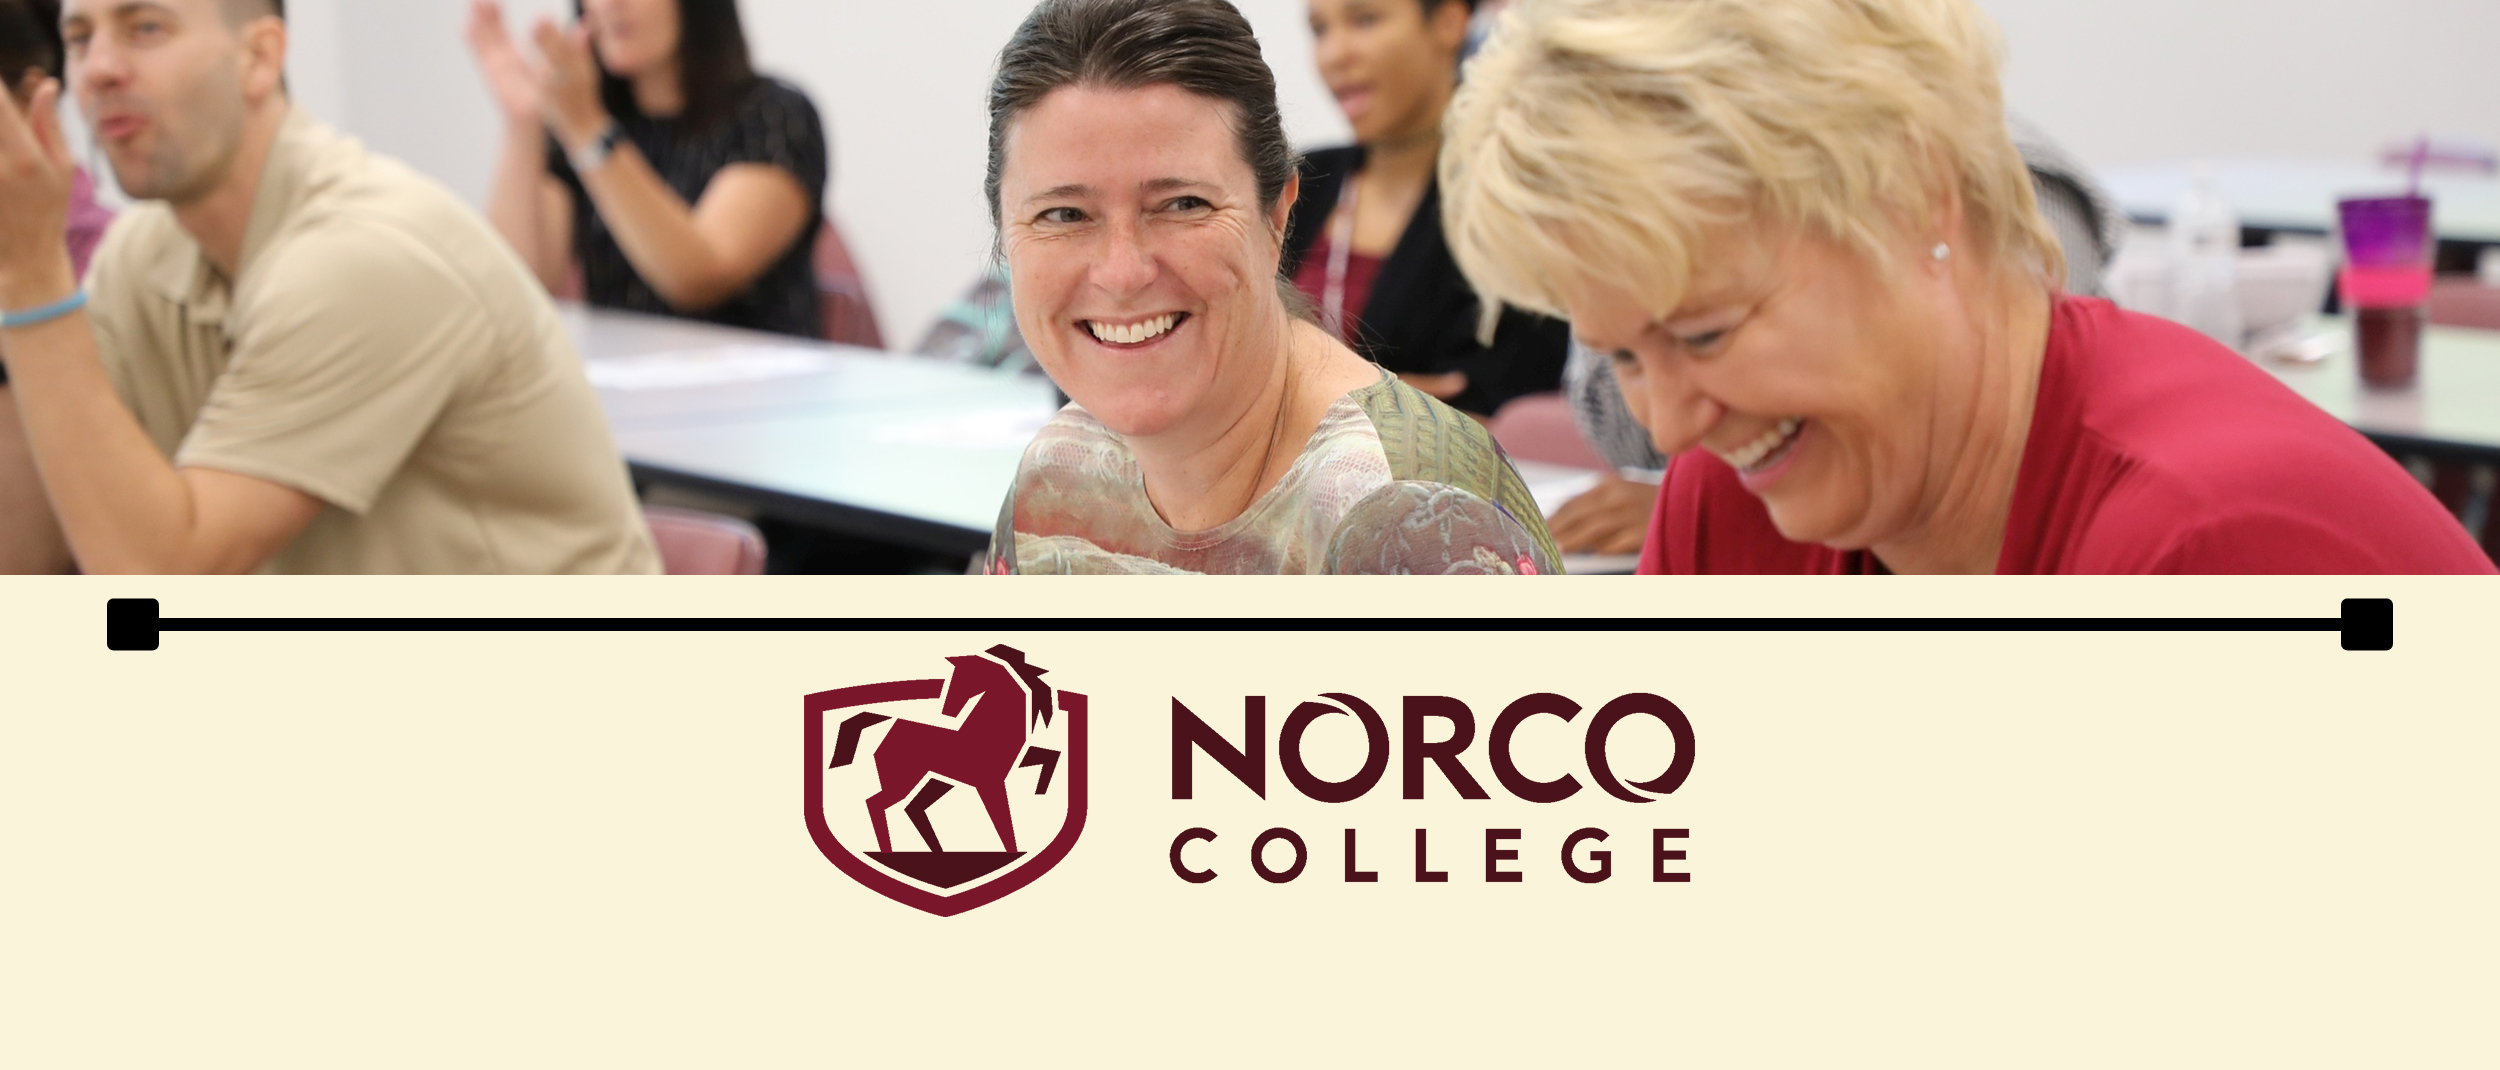 Norco College Governance Entities hero image banner